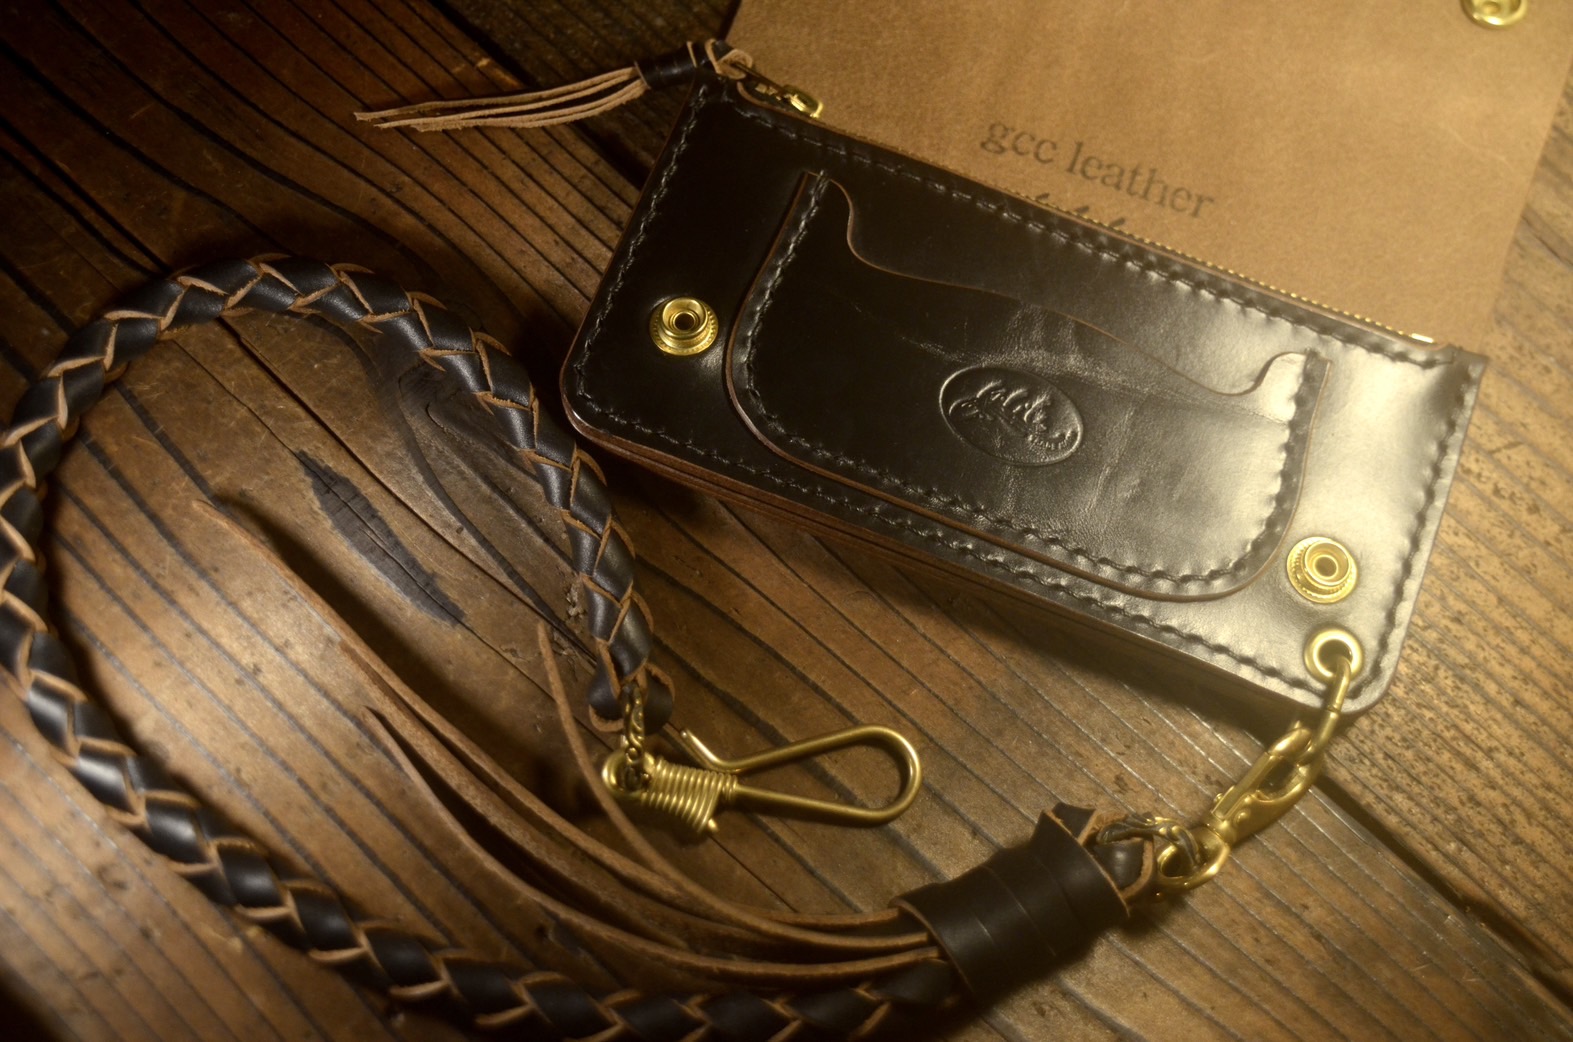 LEATHER LONG WALLET